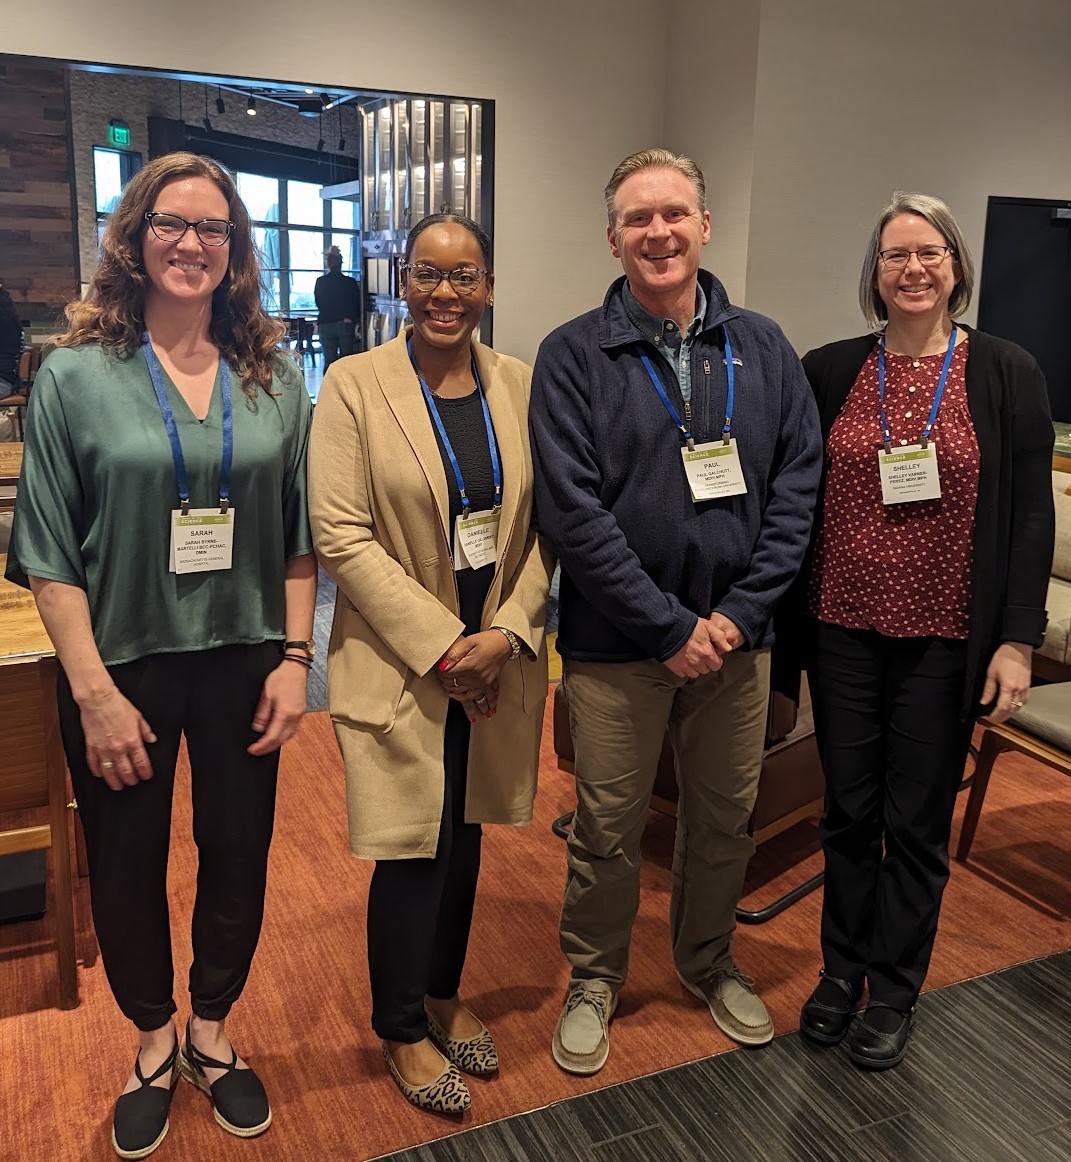 This was a still point in the turning world moment to stand among beloved friends and #research #chaplain colleagues, @byrne_martelli, Danielle Gilchrist, and @ChapVp as we departed from the #hapc24 State of the Science. Thanks to @AAHPM & @HPNAinfo! Looking ➡️ to Denver 2025.